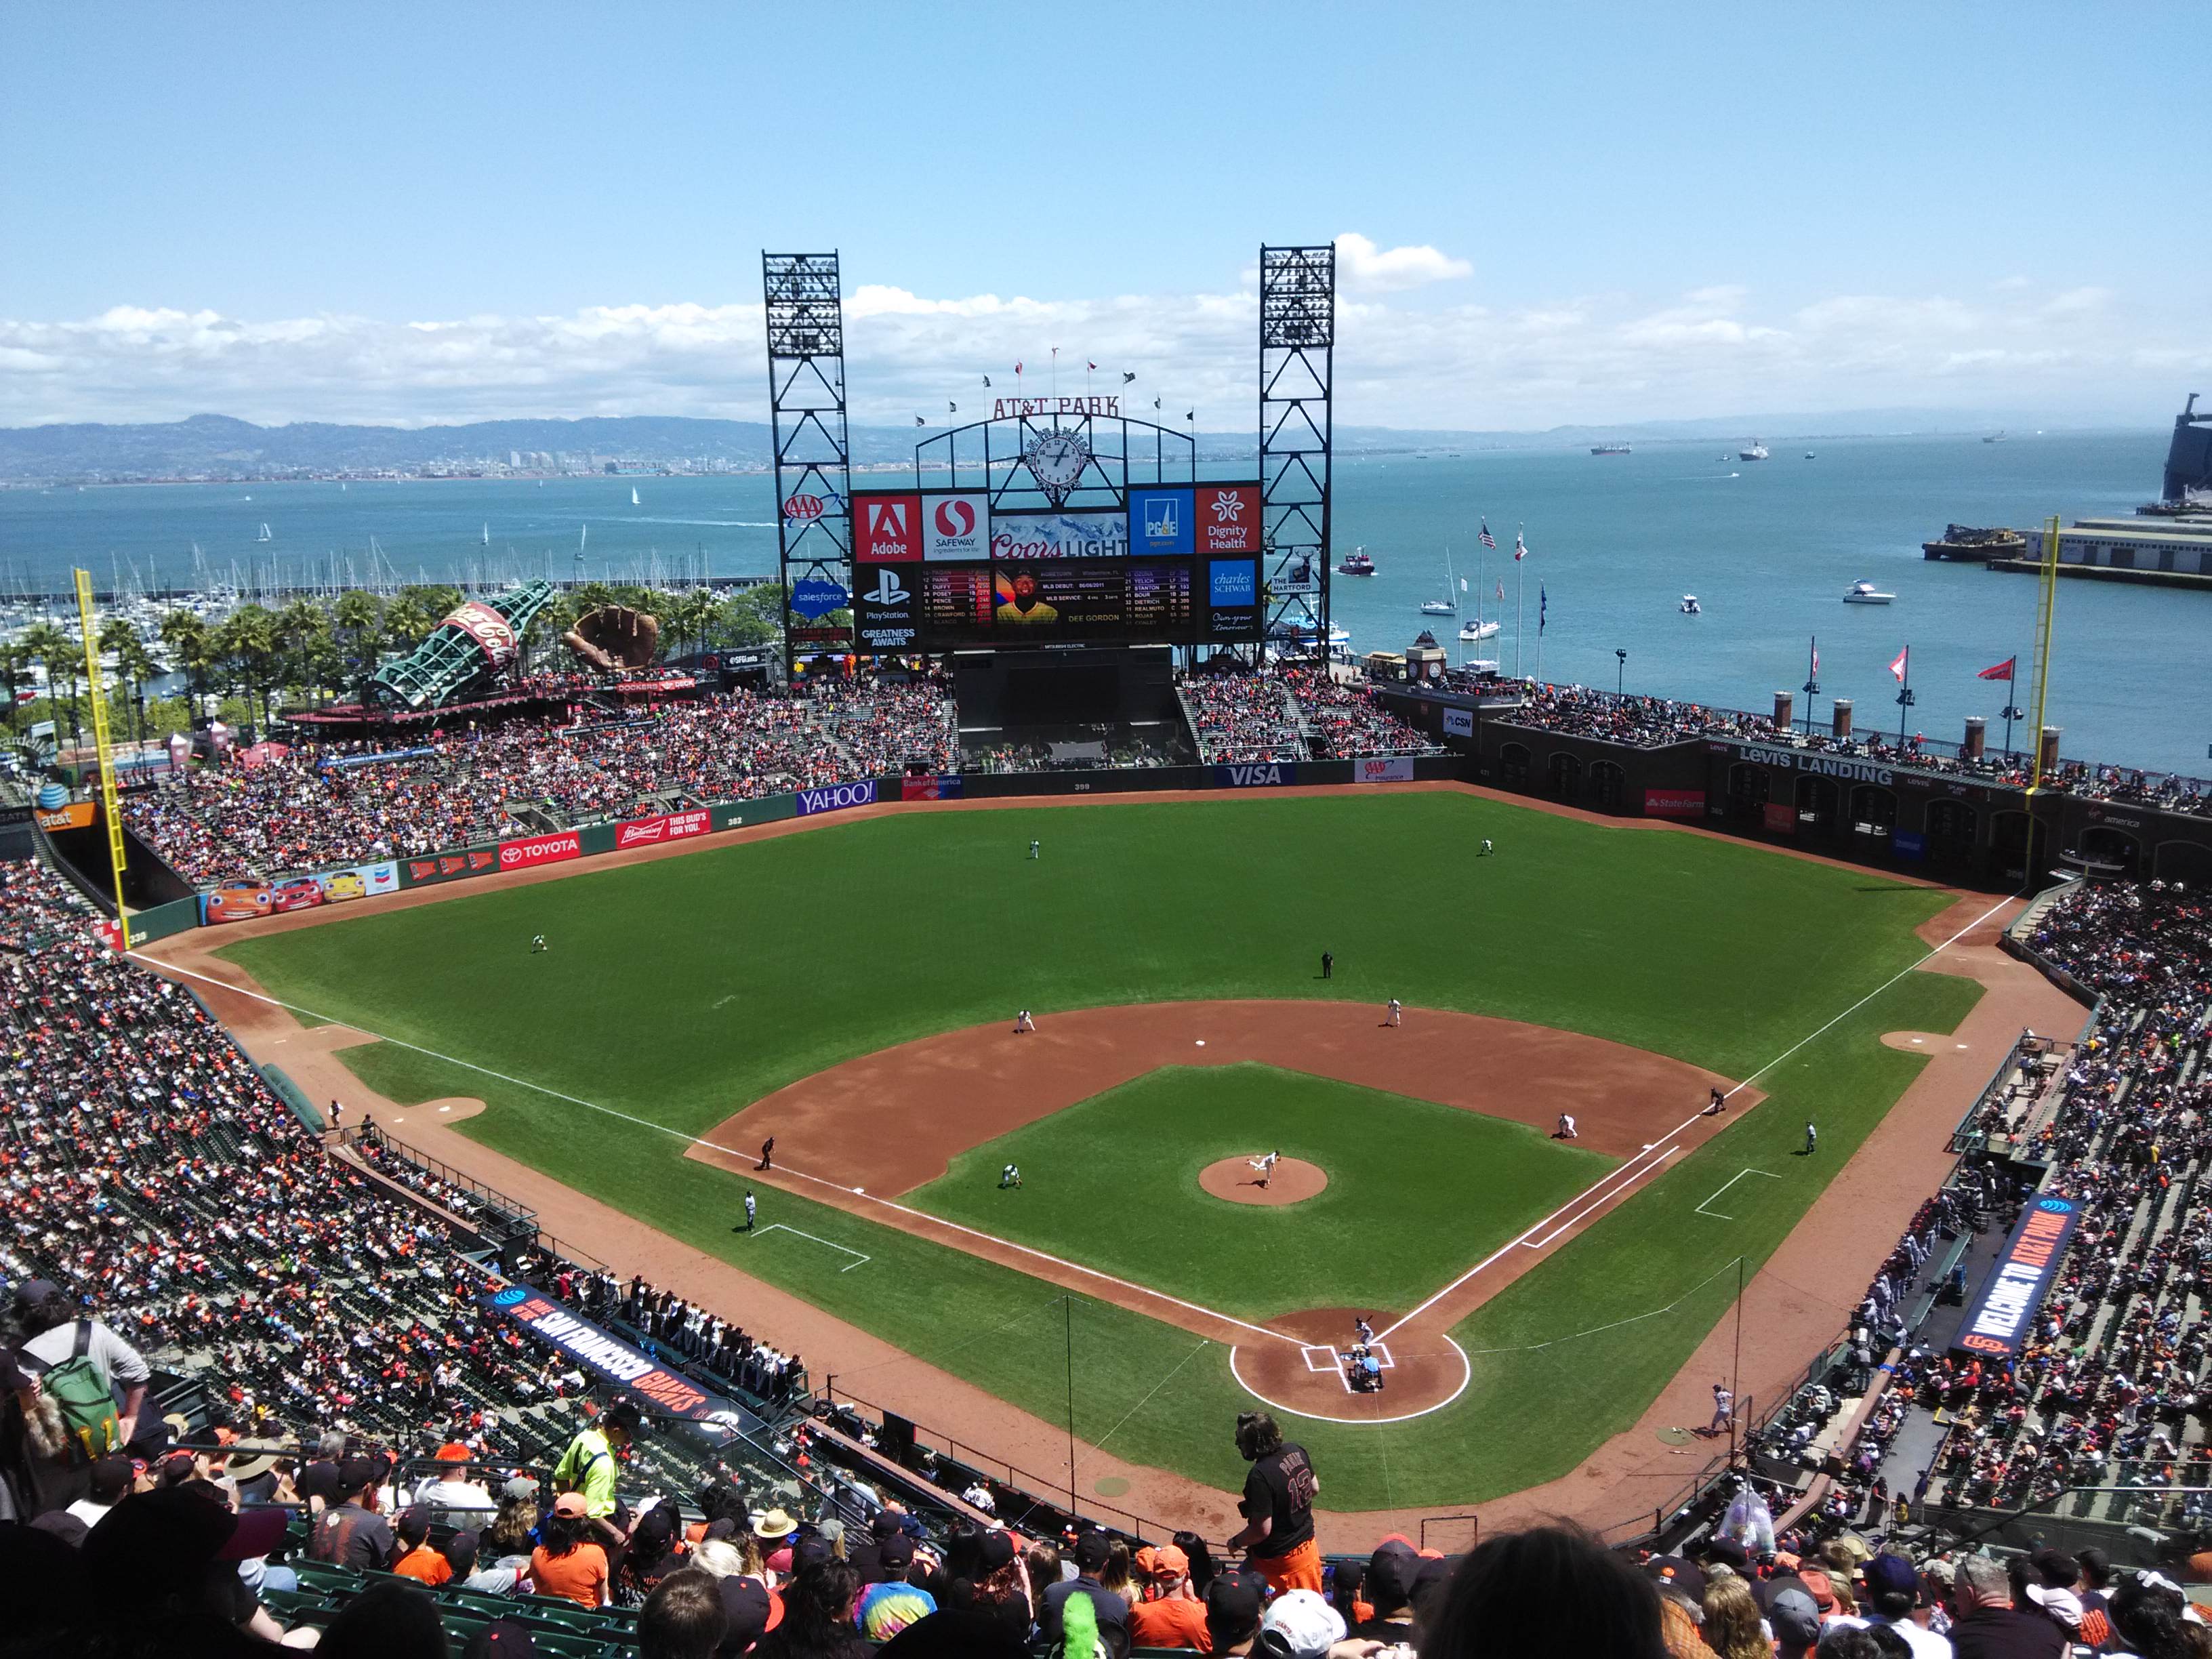 Catching the San Francisco Giants LIVE at ATandT Park!